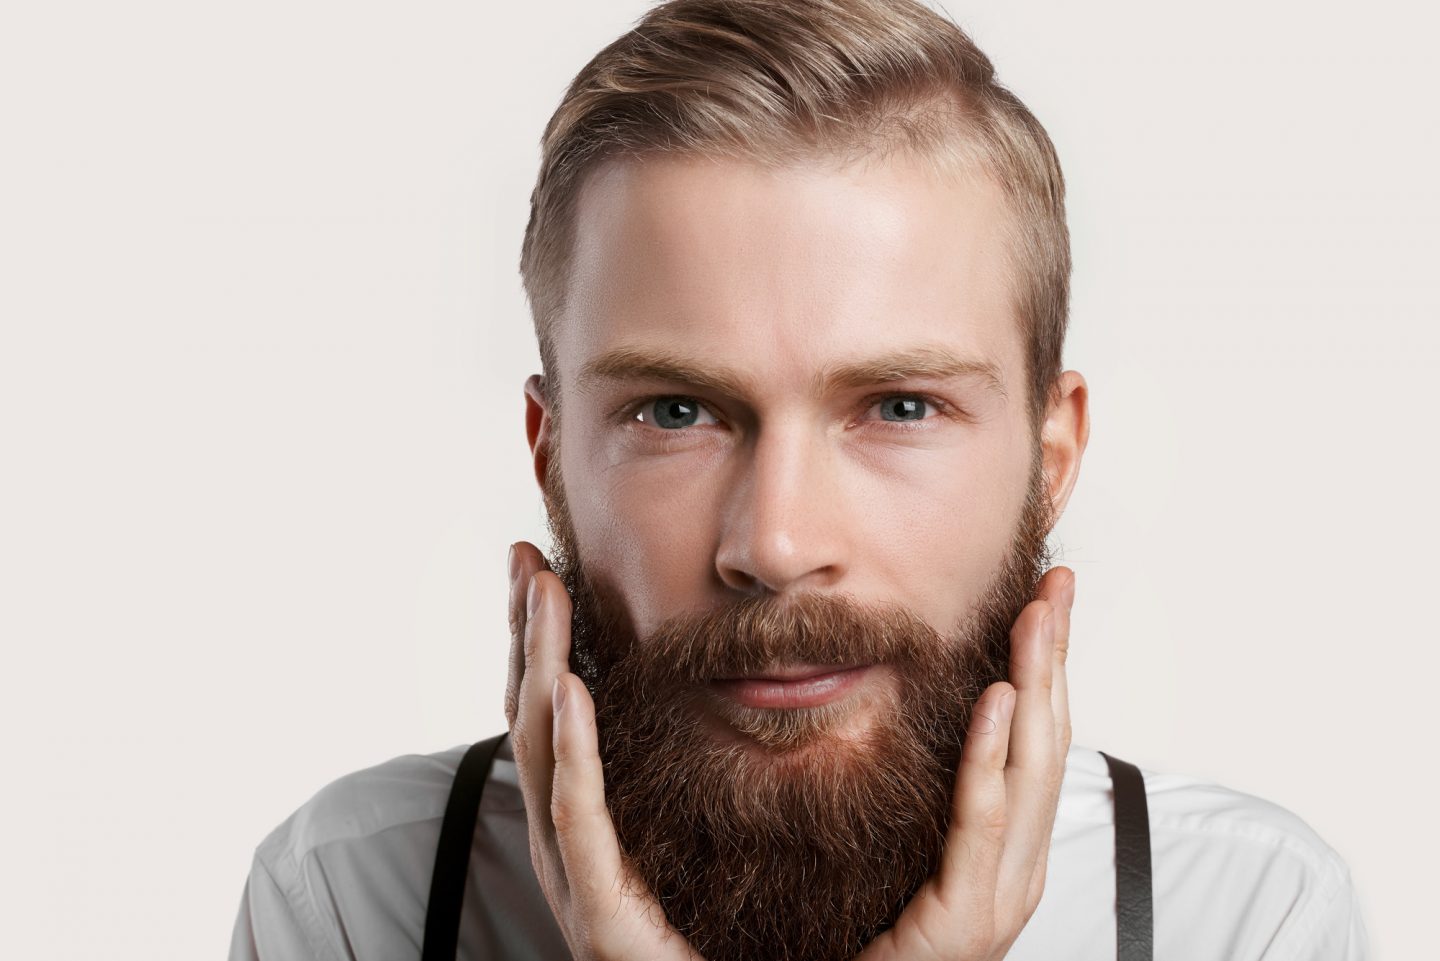 How You Can Shape a Beard to Your Face